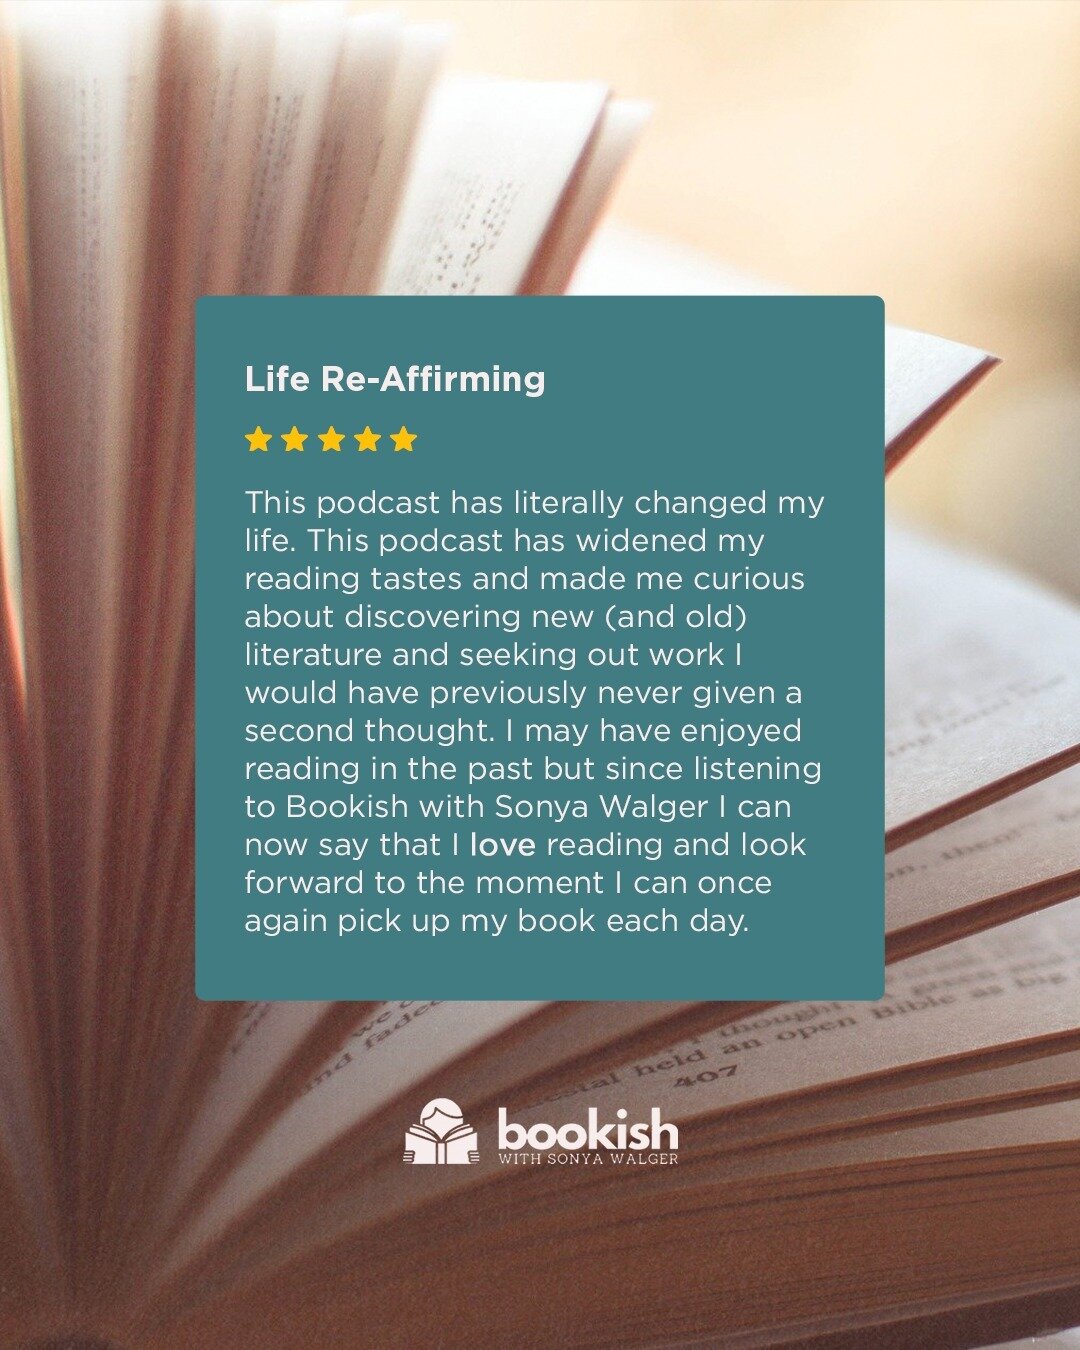 Thank you for this lovely, lovely review, Ally McLaren. We really appreciate your kind words. Not only does it strokes our ego, it also helps us grow the podcast and reach new listeners. ⁠
⁠
If you haven't already, please rate and review wherever you